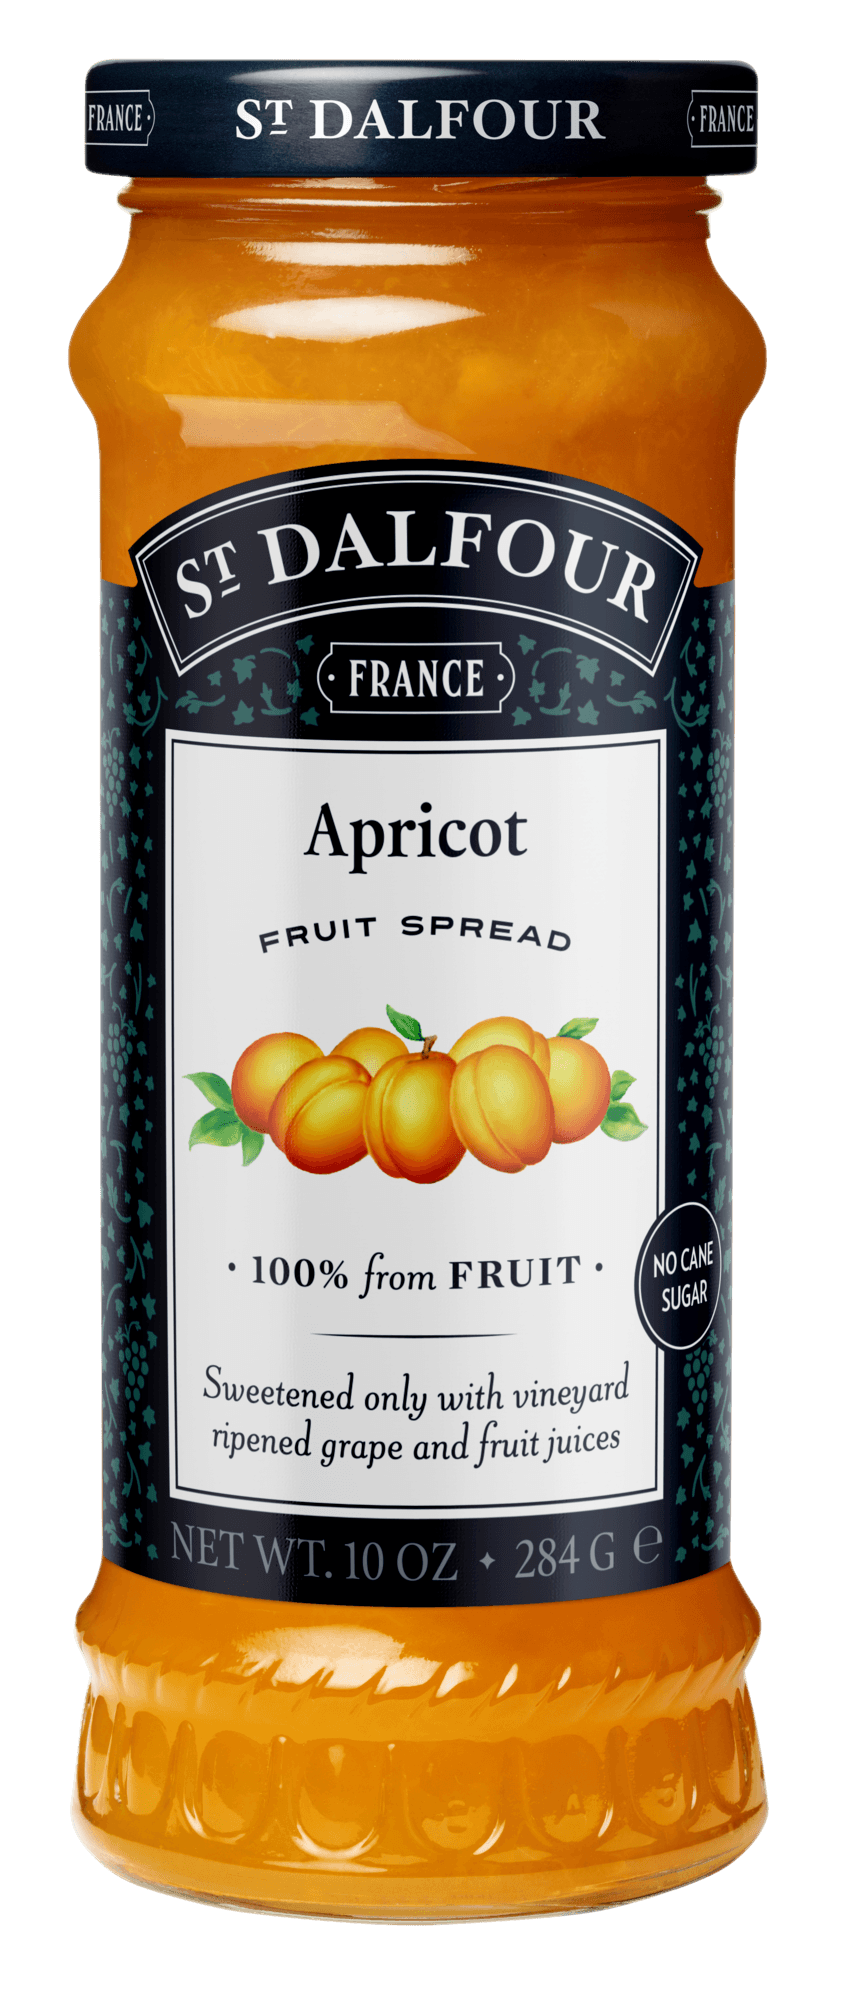 A bottle of St. Dalfour's Apricot fruit spread